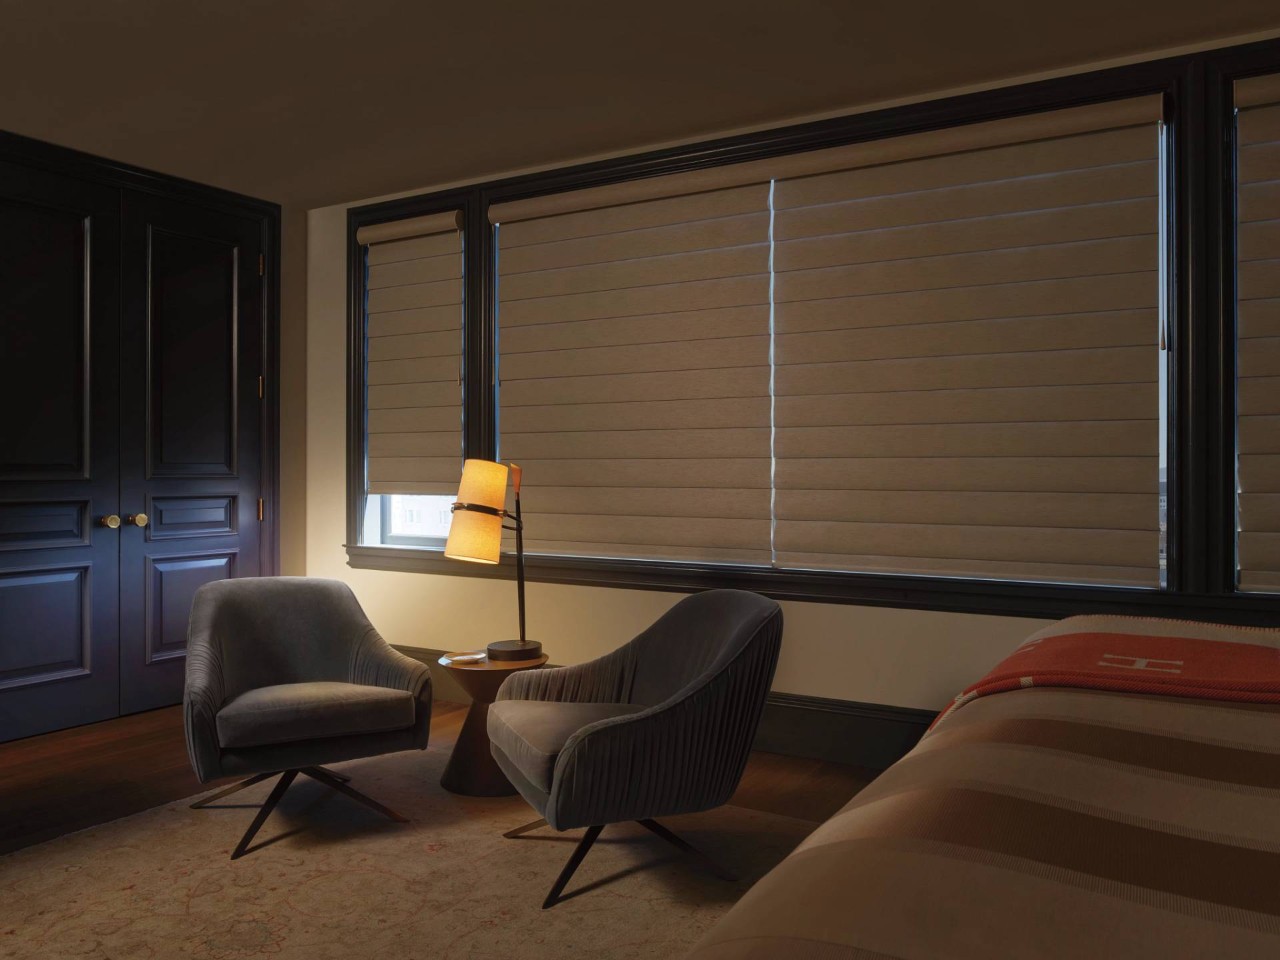 Bedroom with large window decorated with Hunter Douglas Pirouette® Window Shadings near Cambridge, MD